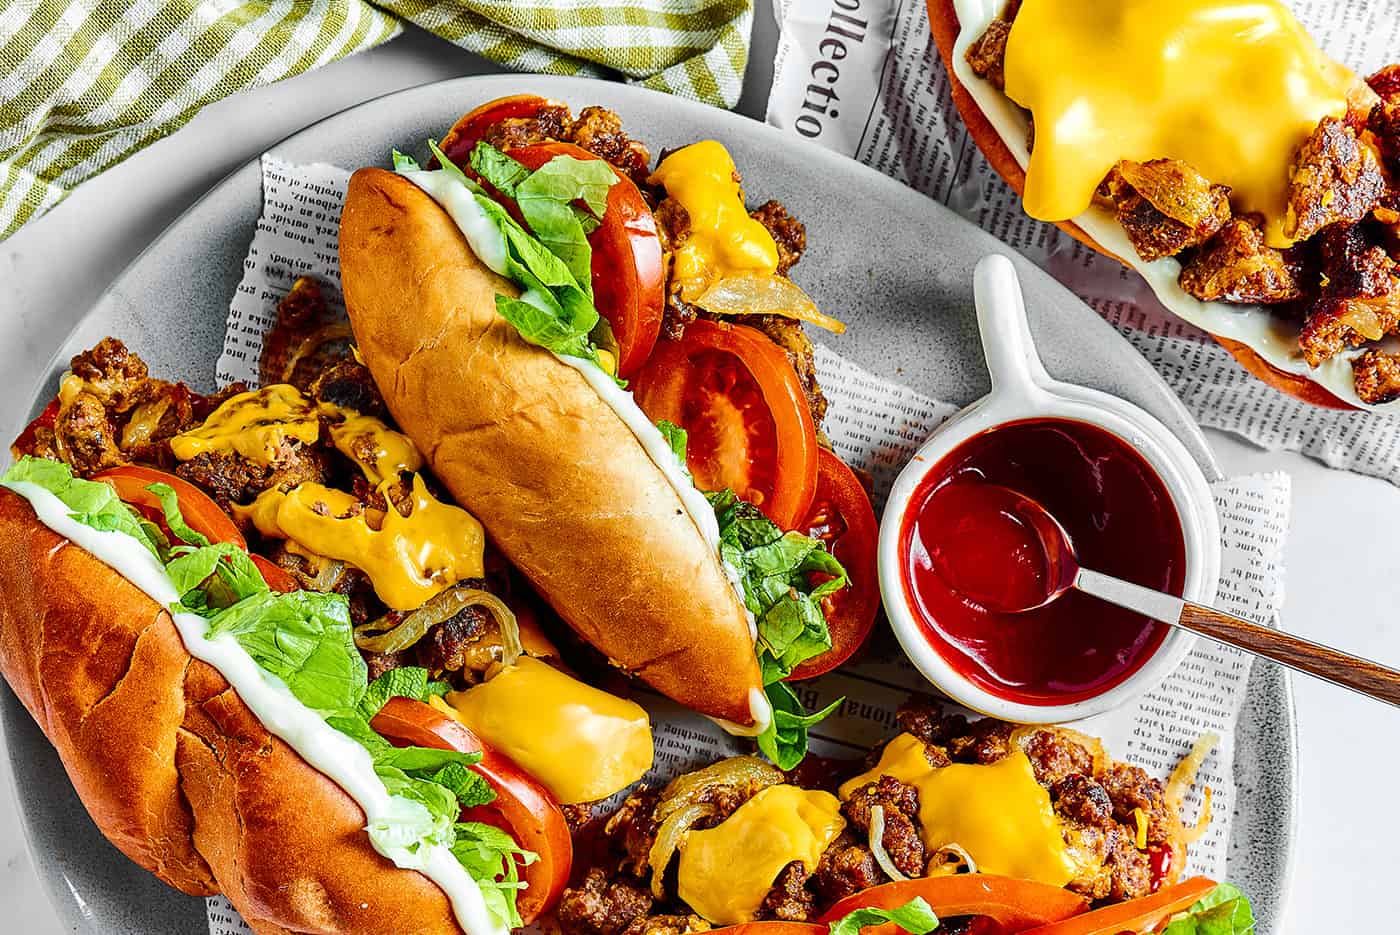 a platter of hoagie buns filled with chopped beef, cheese, lettuce, and cheese